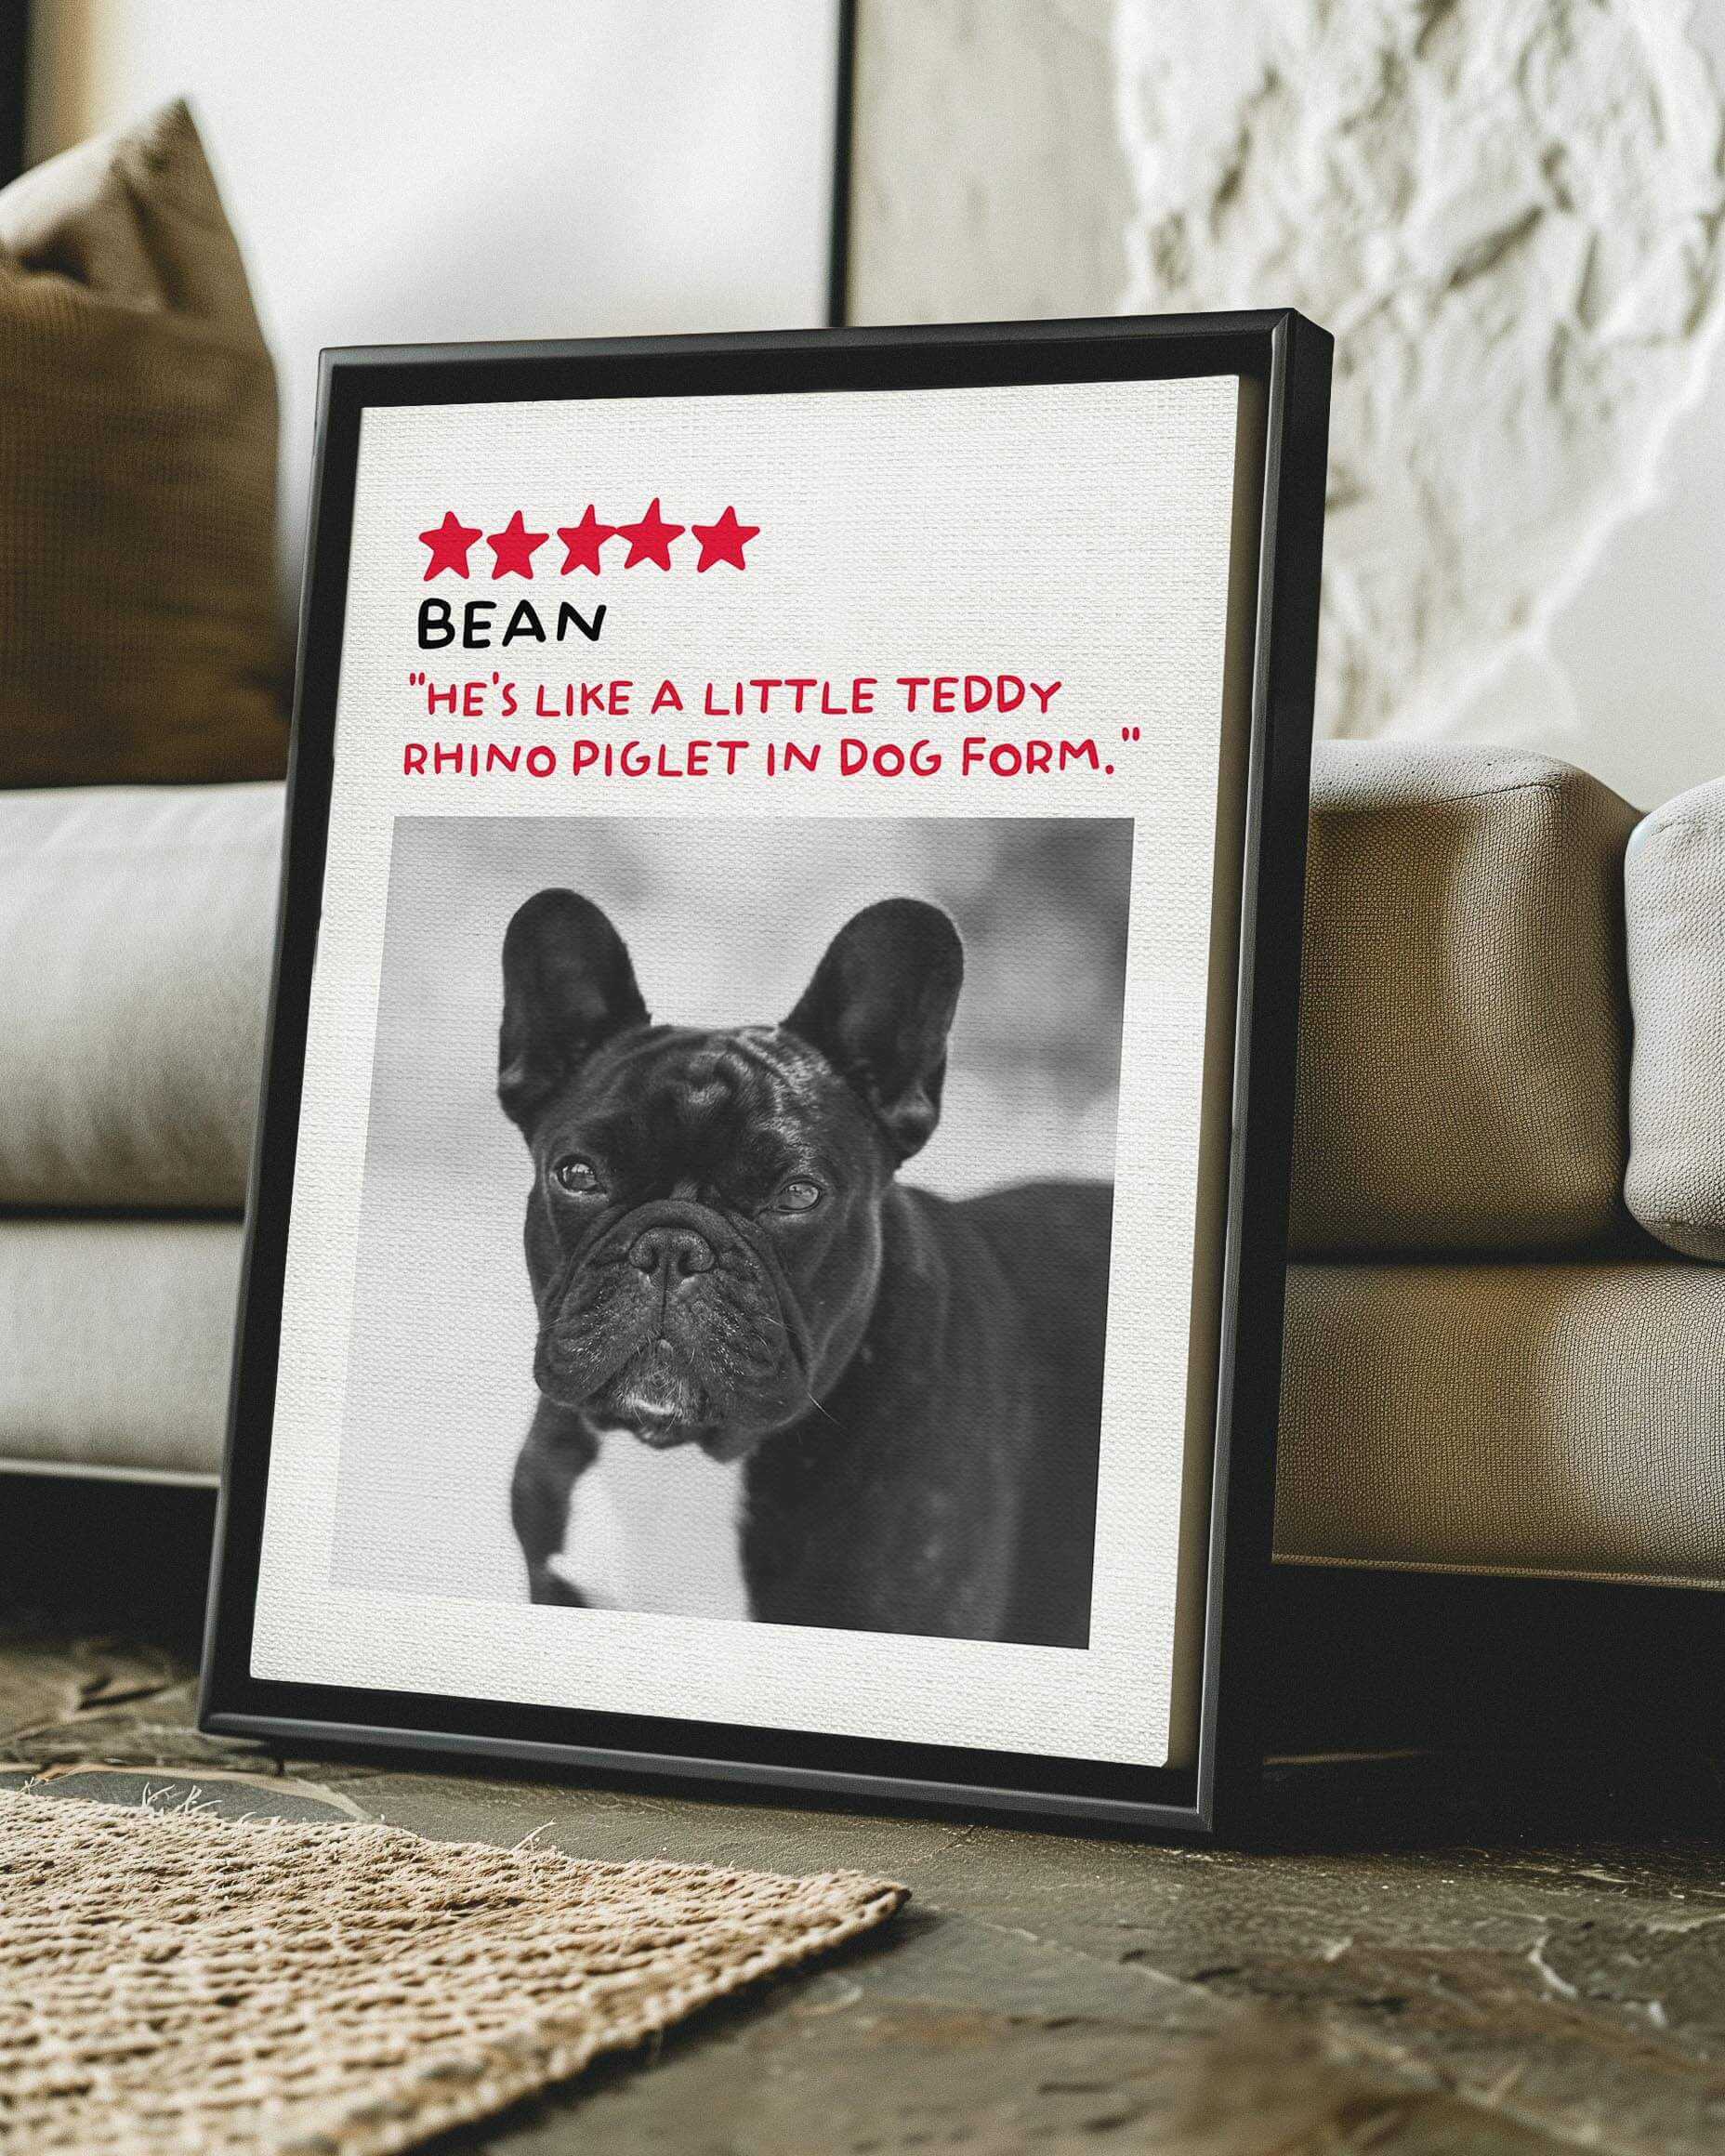 French Bulldog photo printed in black and white custom art on canvas and mounted on wall of contemporary home decor living space creating a unique custom gift idea for dog mom and dog dad pet parents made by vogue paws personalized pet portrait dog art